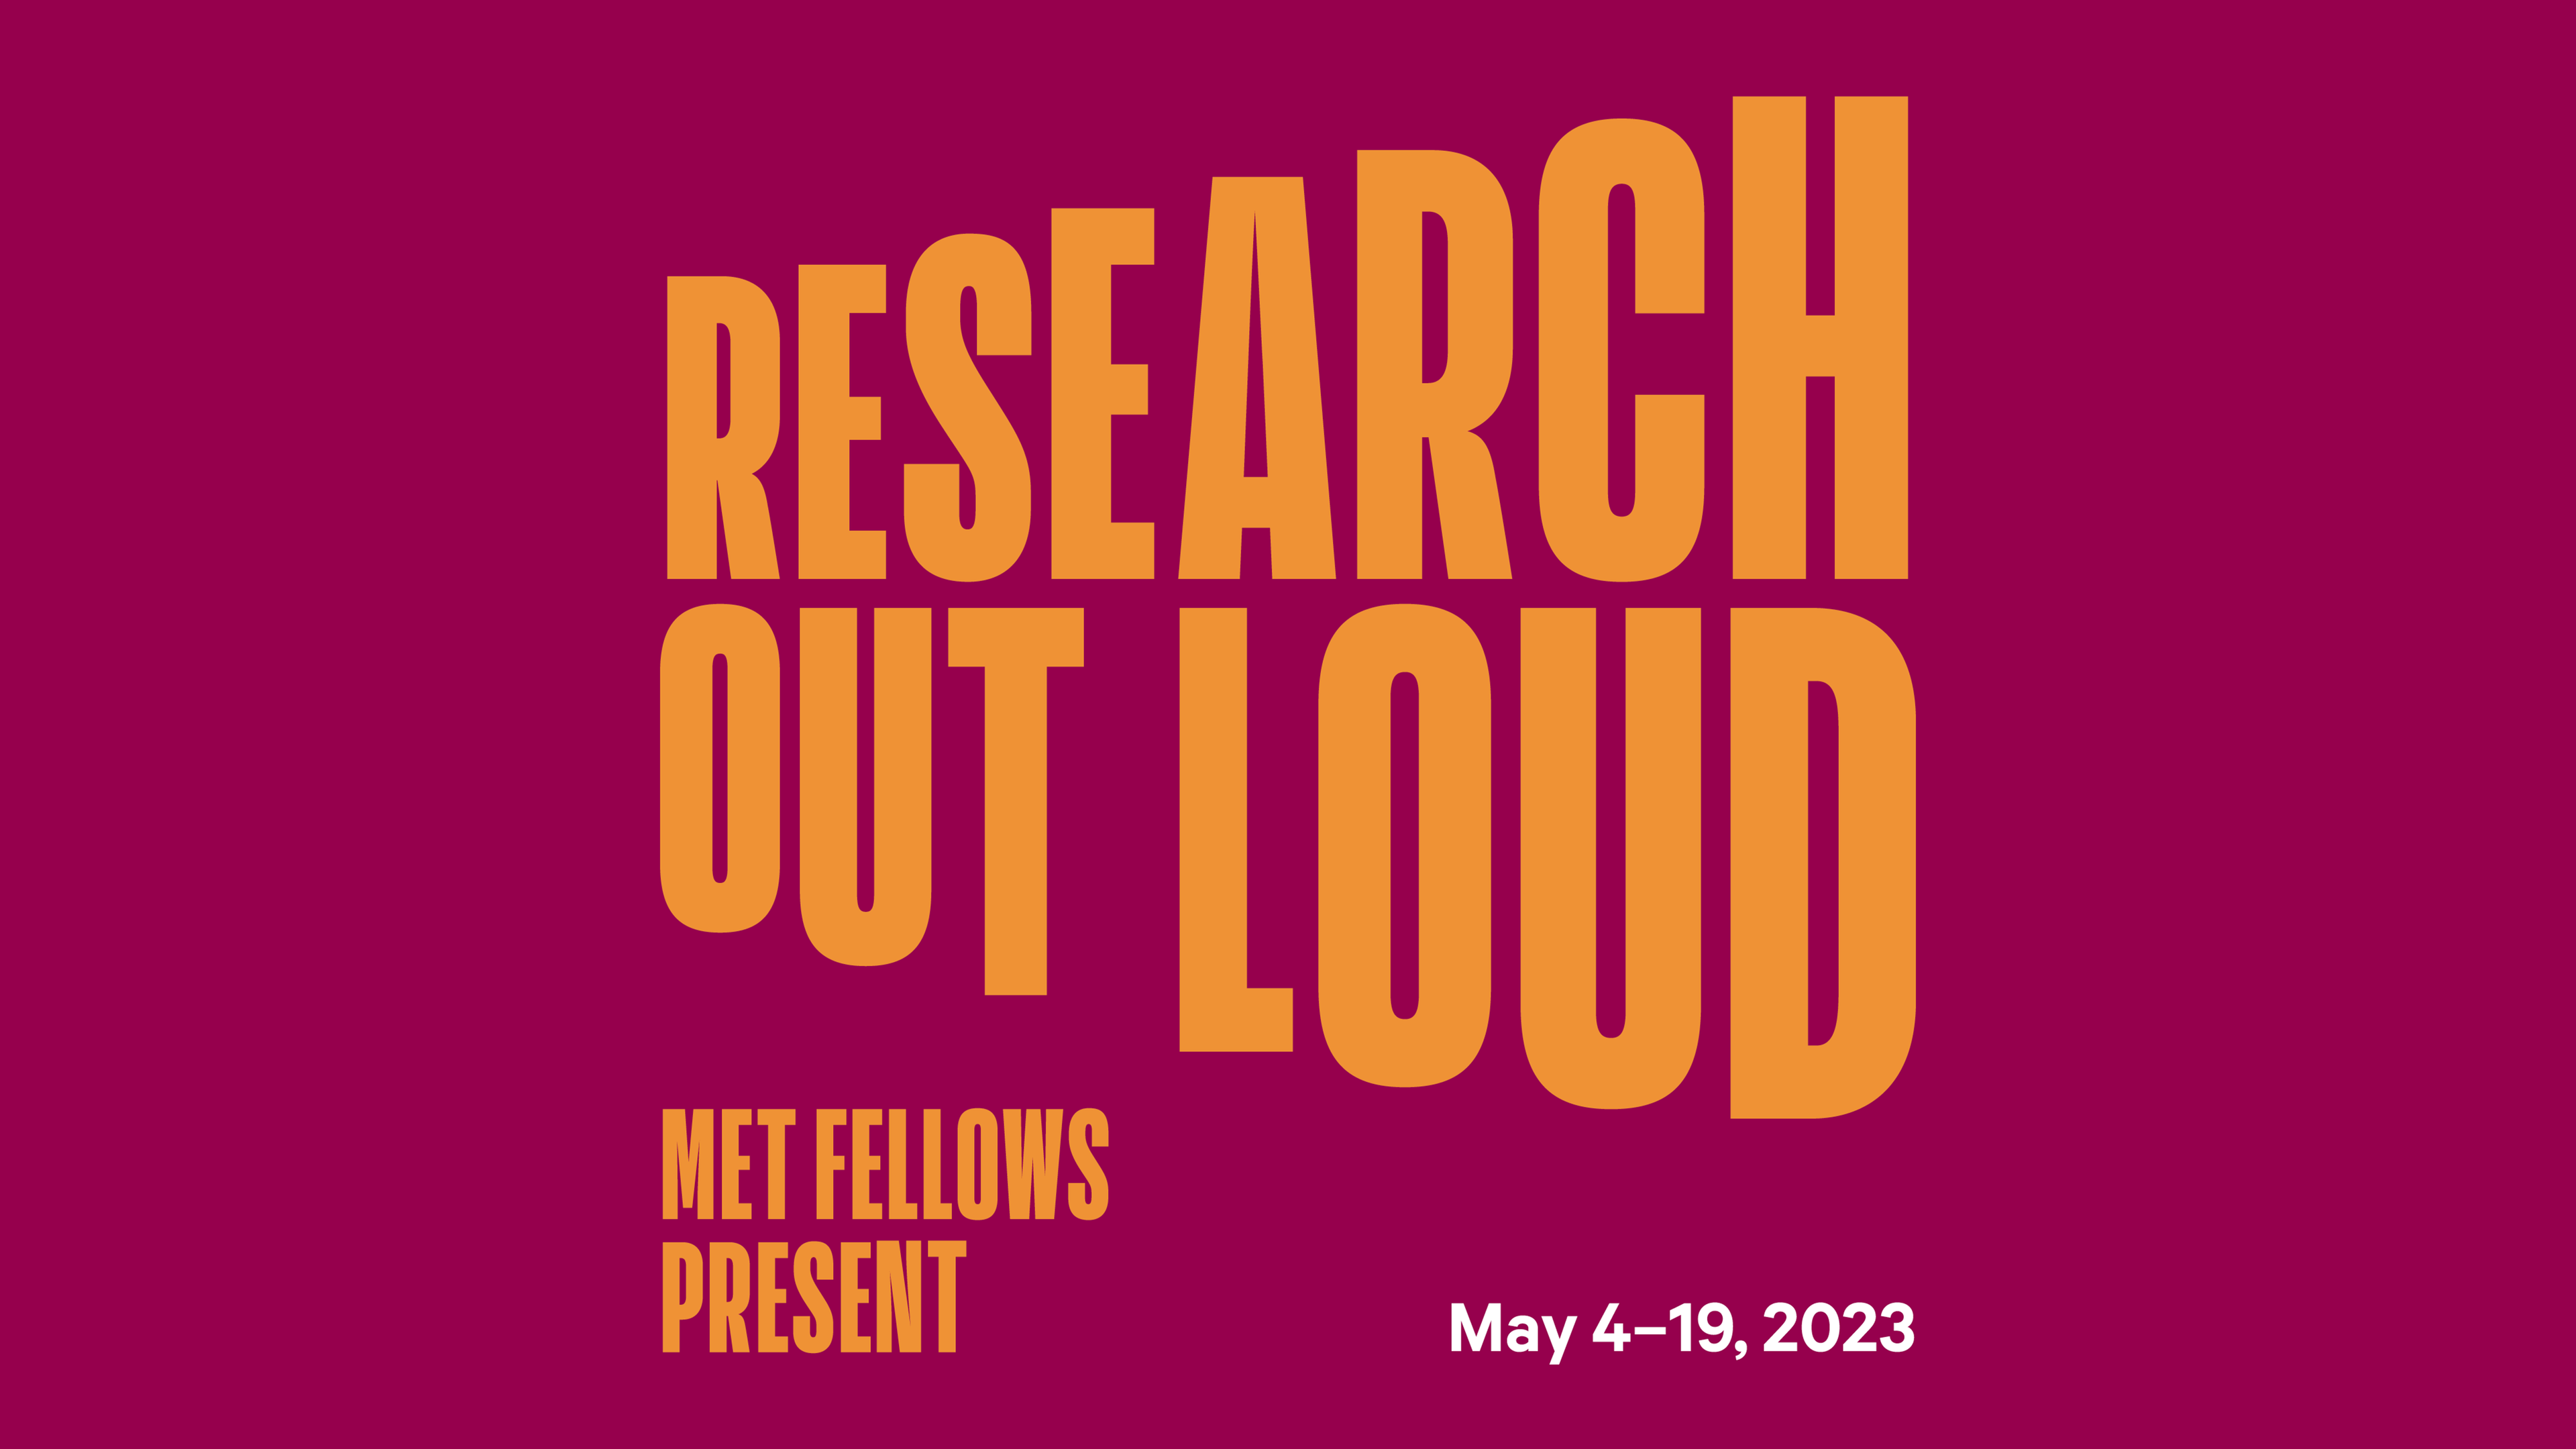 Golden text on a magenta background reads "Research Out Loud Met Fellows Present May 4-19, 2023"